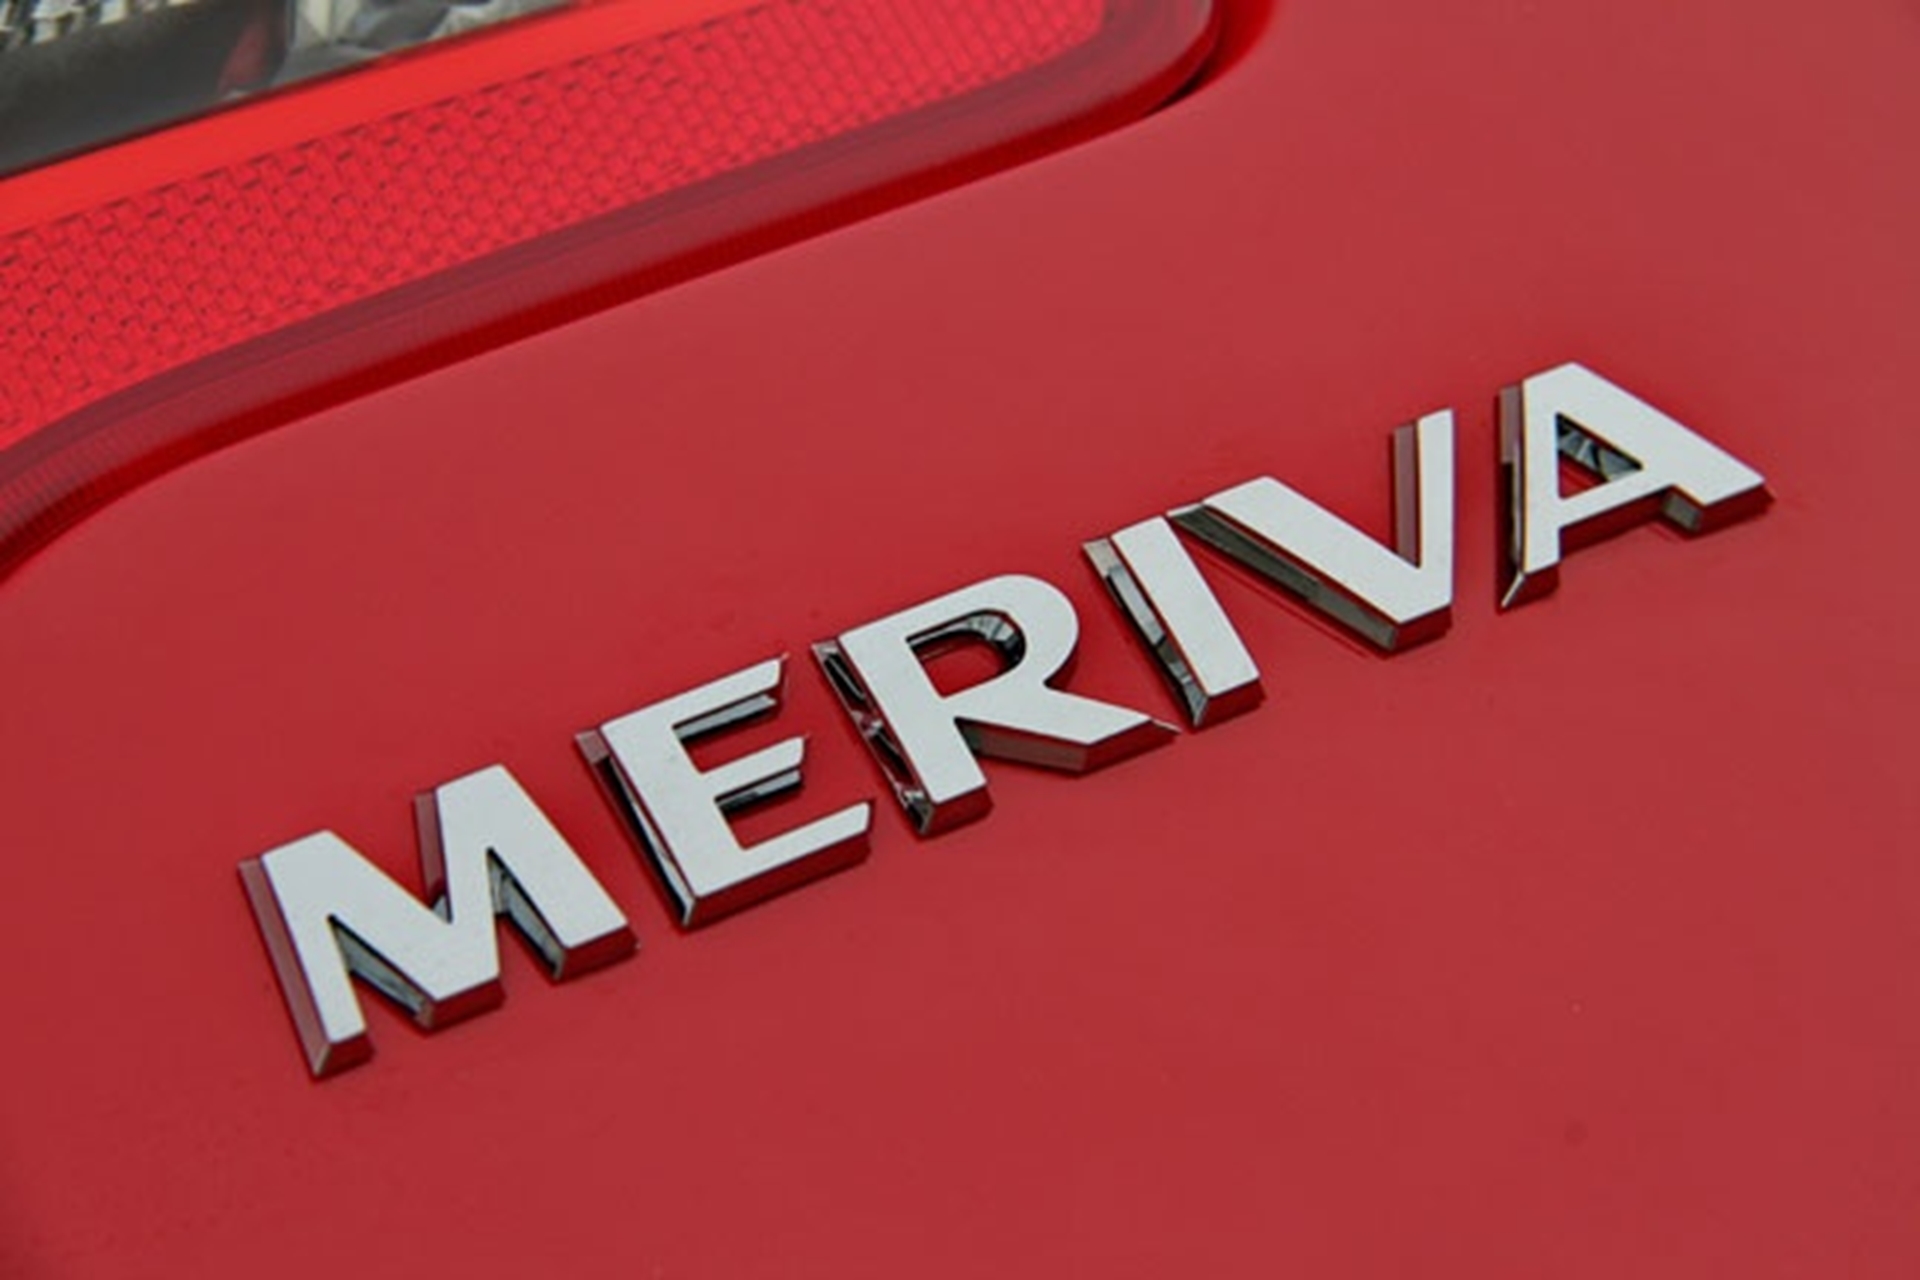 New Opel Meriva: Designed For Elegance And Functionality